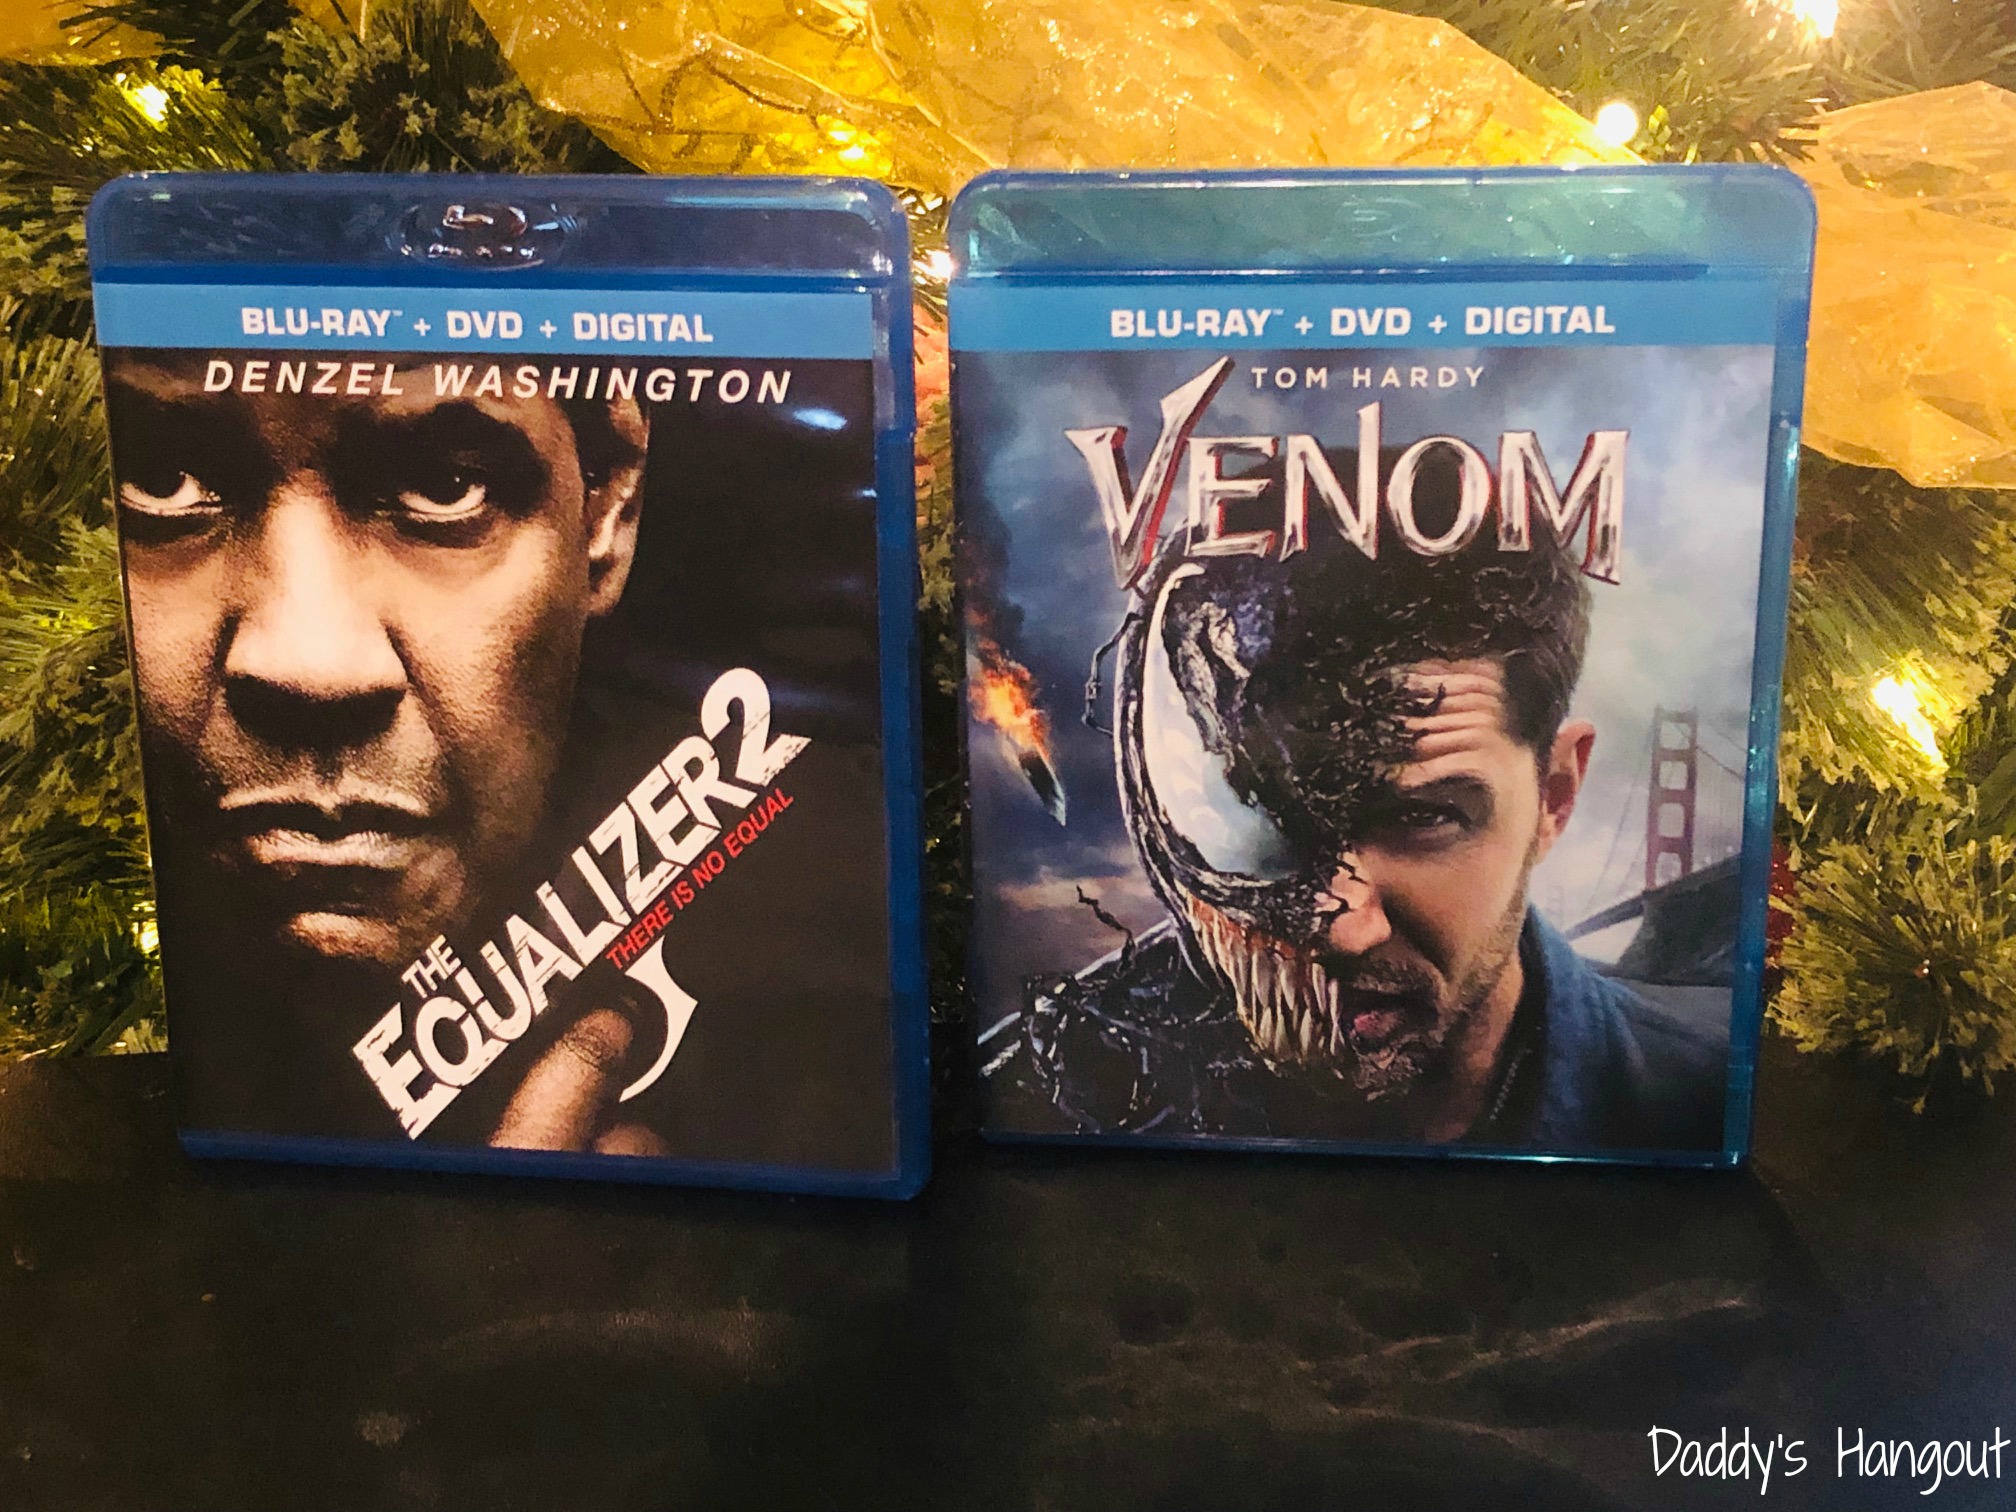 Add 2 Great Movies from Walmart To Your Christmas List